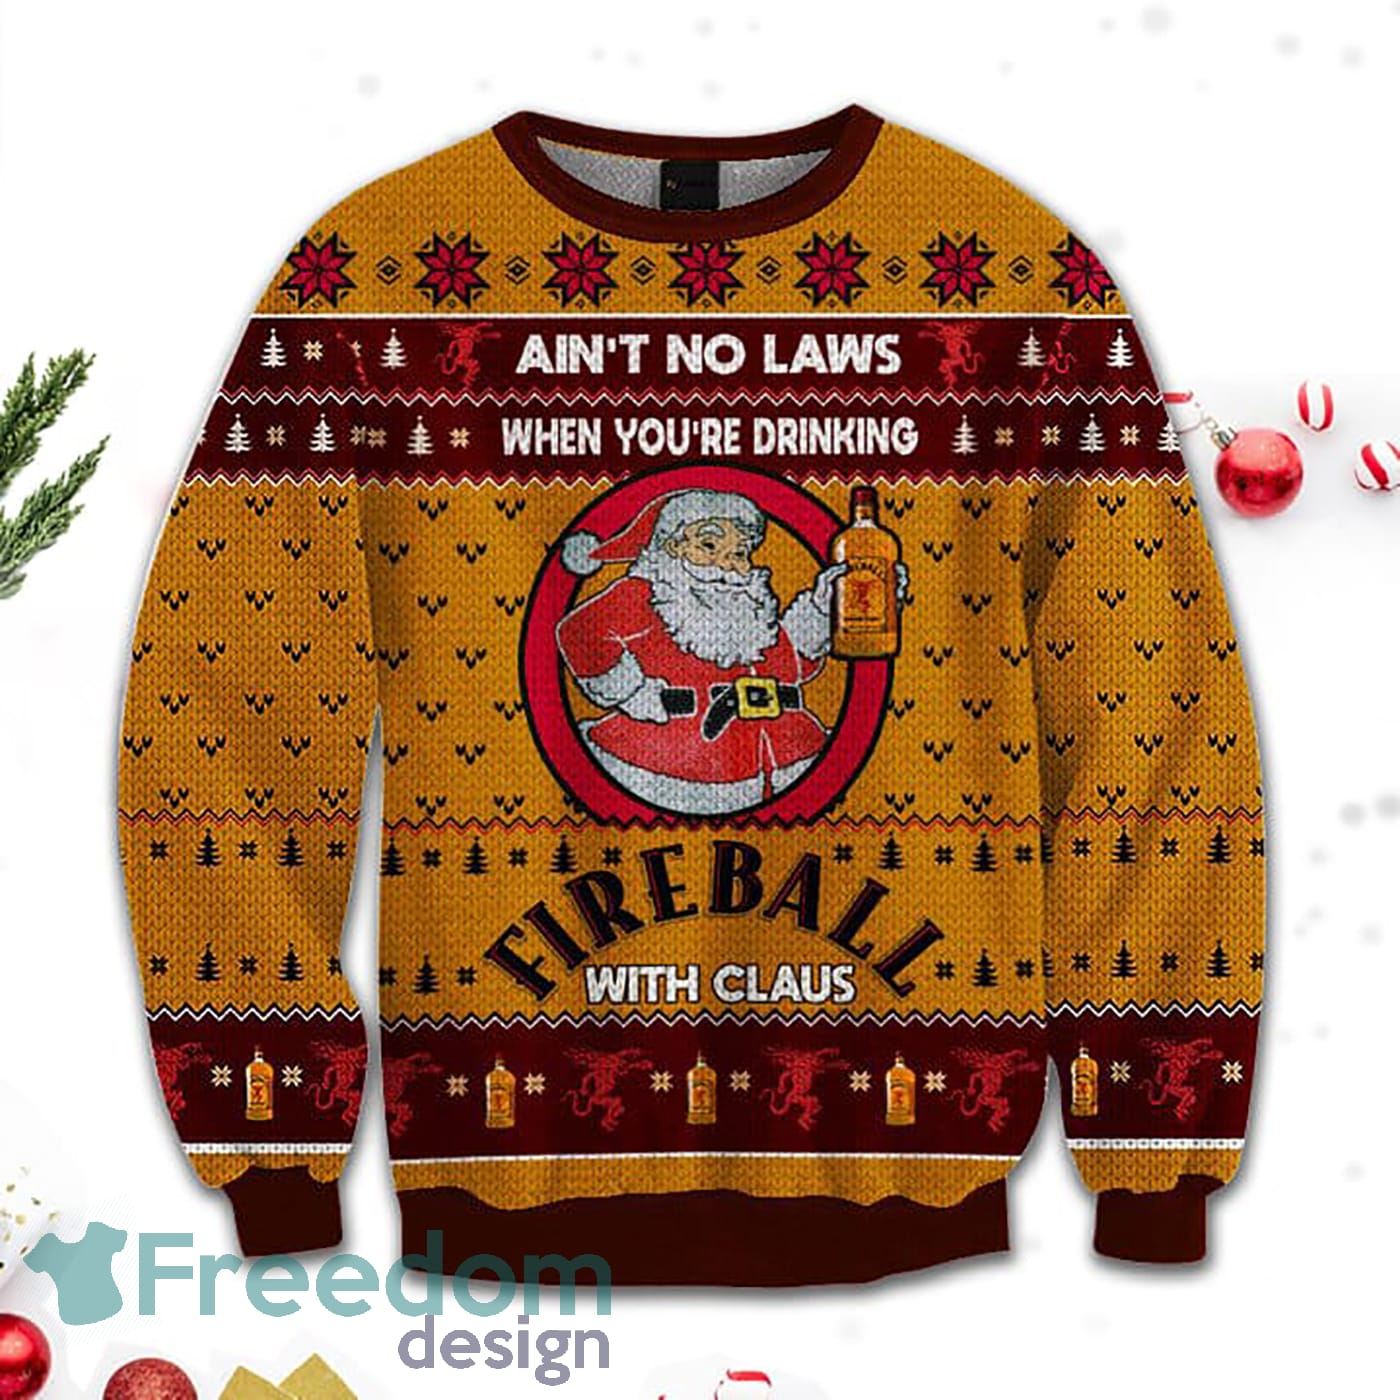 Merr Christmas Ain't No Laws When You Drink Fire Ball With Claus Sweatshirt